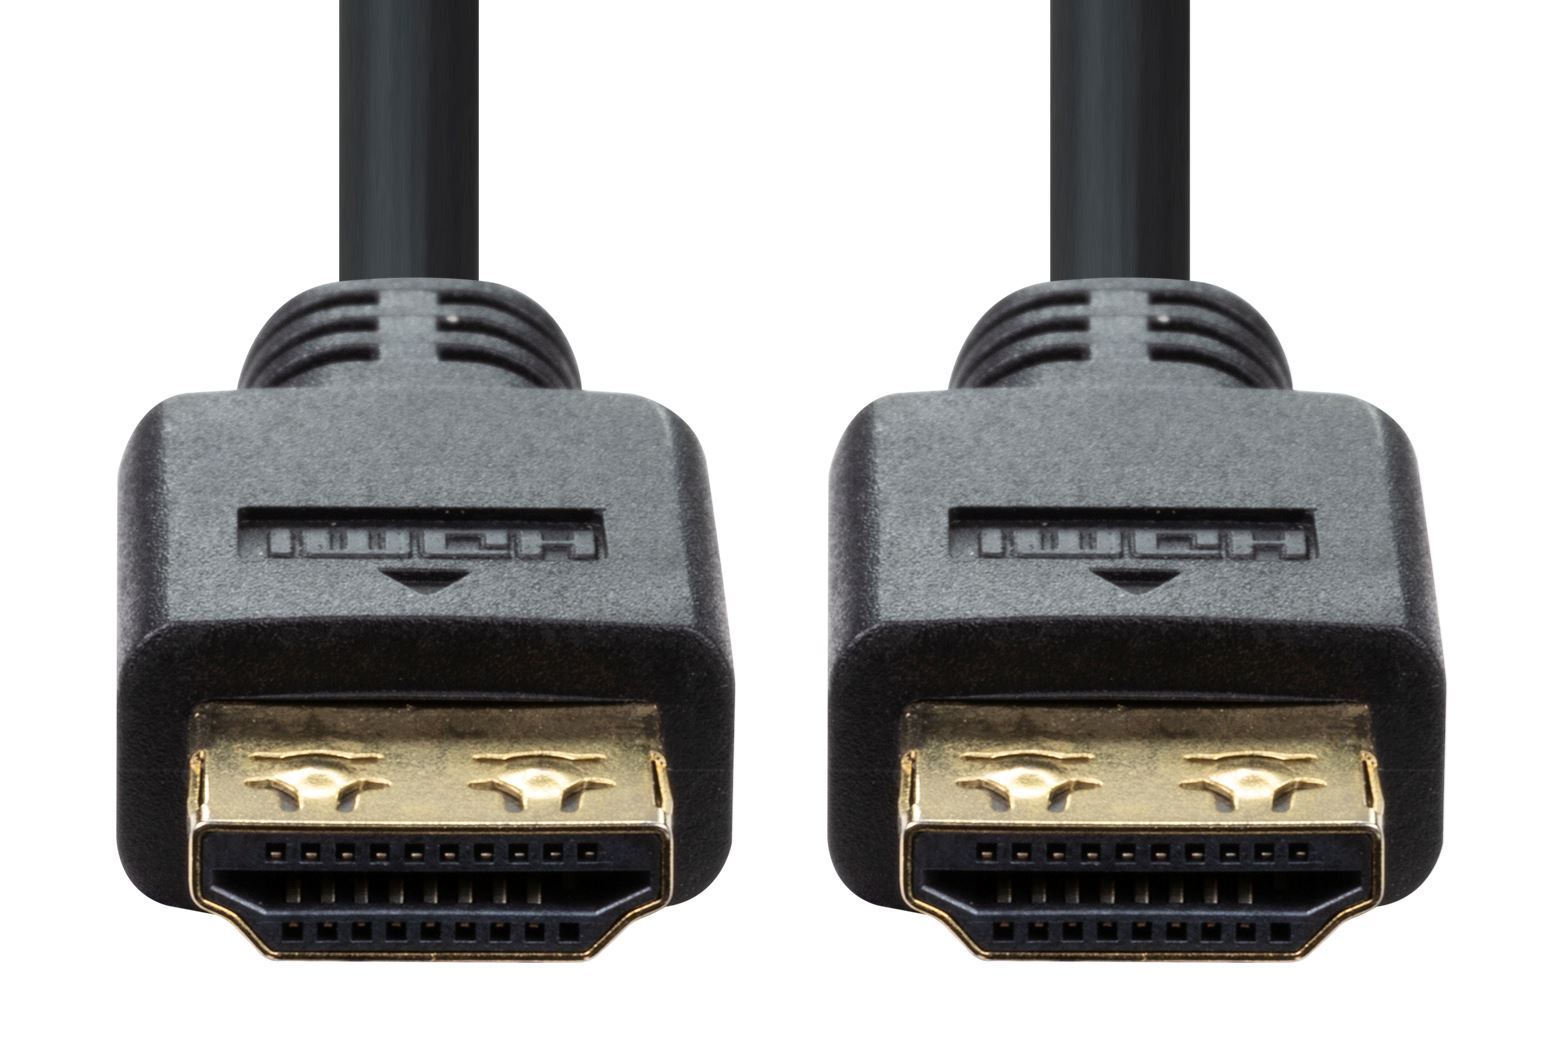 DYNAMIX_0.5m_HDMI_High_Speed_18Gbps_Flexi_Lock_Cable_with_Ethernet._Max_Res:_4K2K@30/60Hz._32_Audio_channels._10/12bit_colour_depth._Supports_CEC_2.0,_3D,_ARC,_Ethernet_2x_simultaneous_video_streams. 703